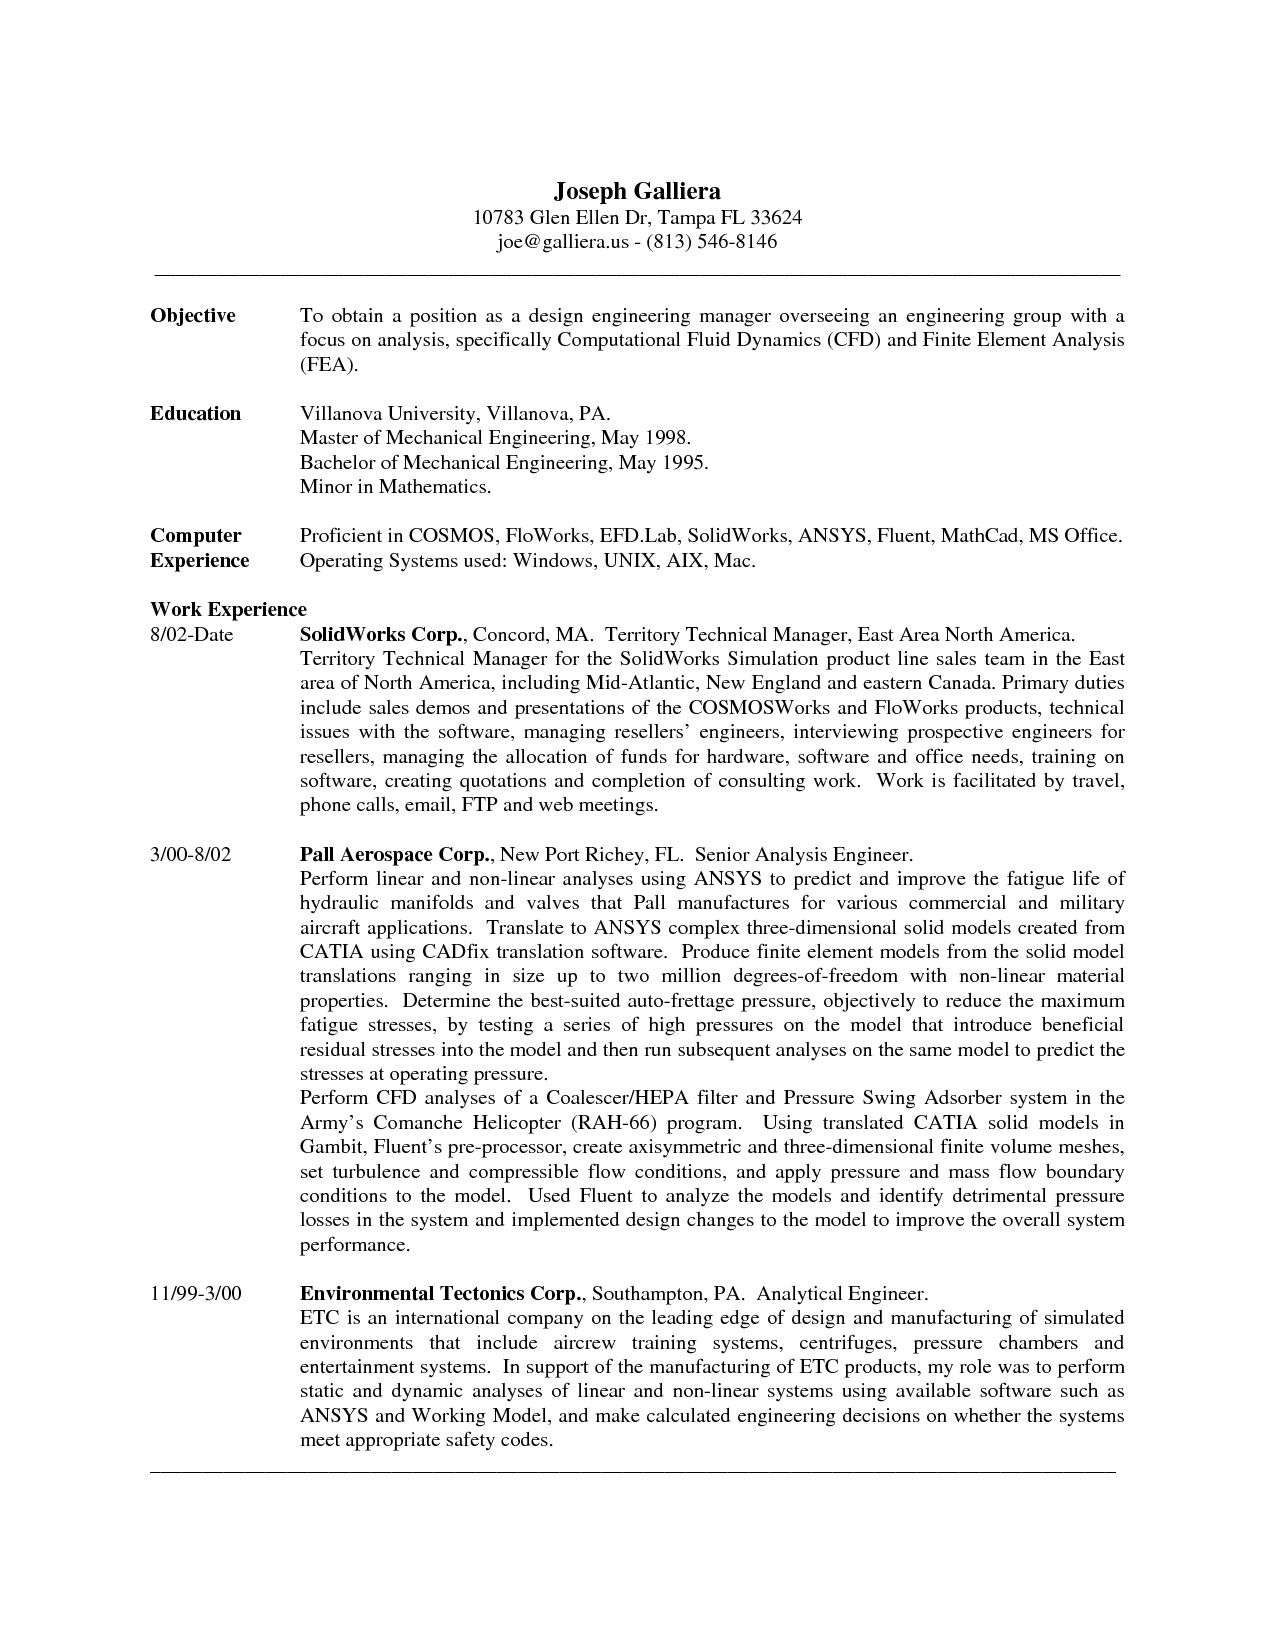 resume examples masters degree